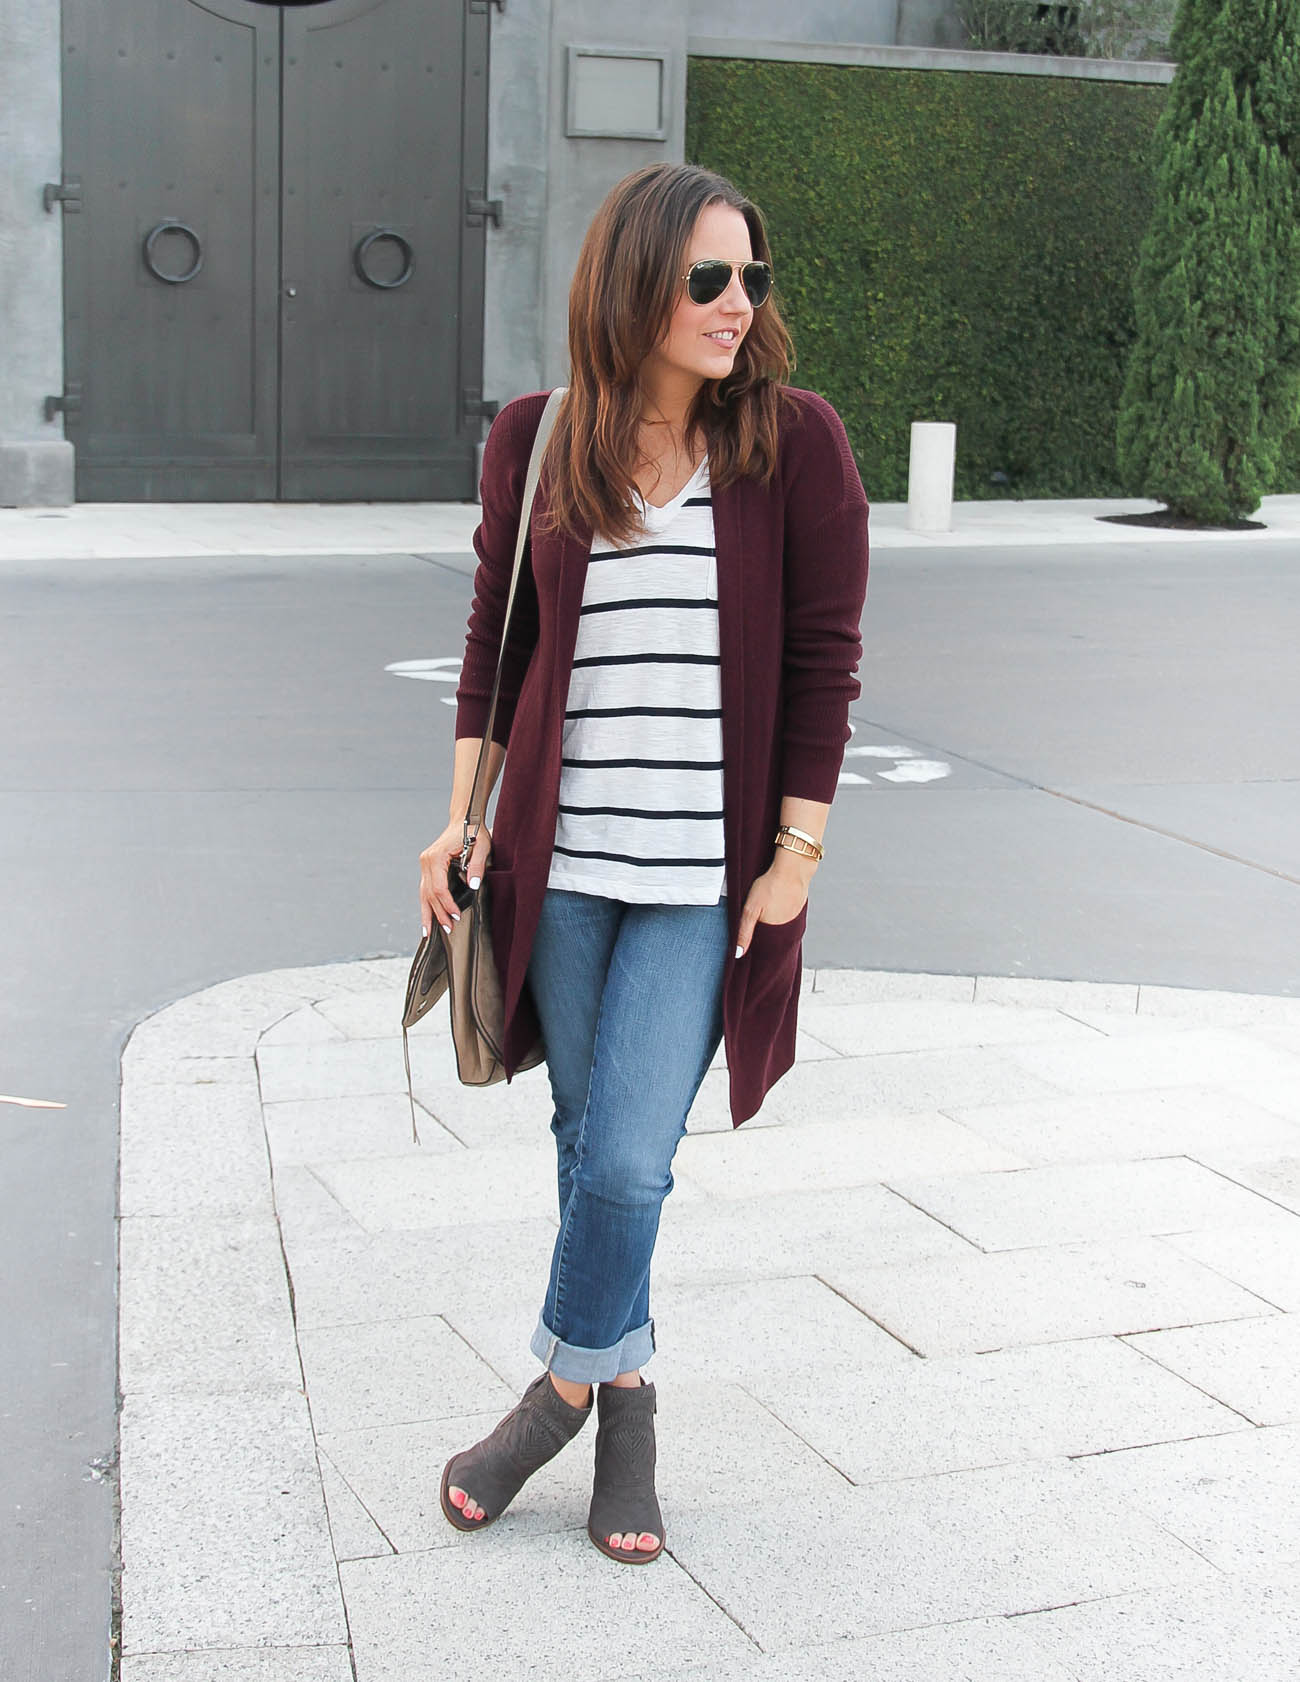 The Long Cardigan You NEED For Fall